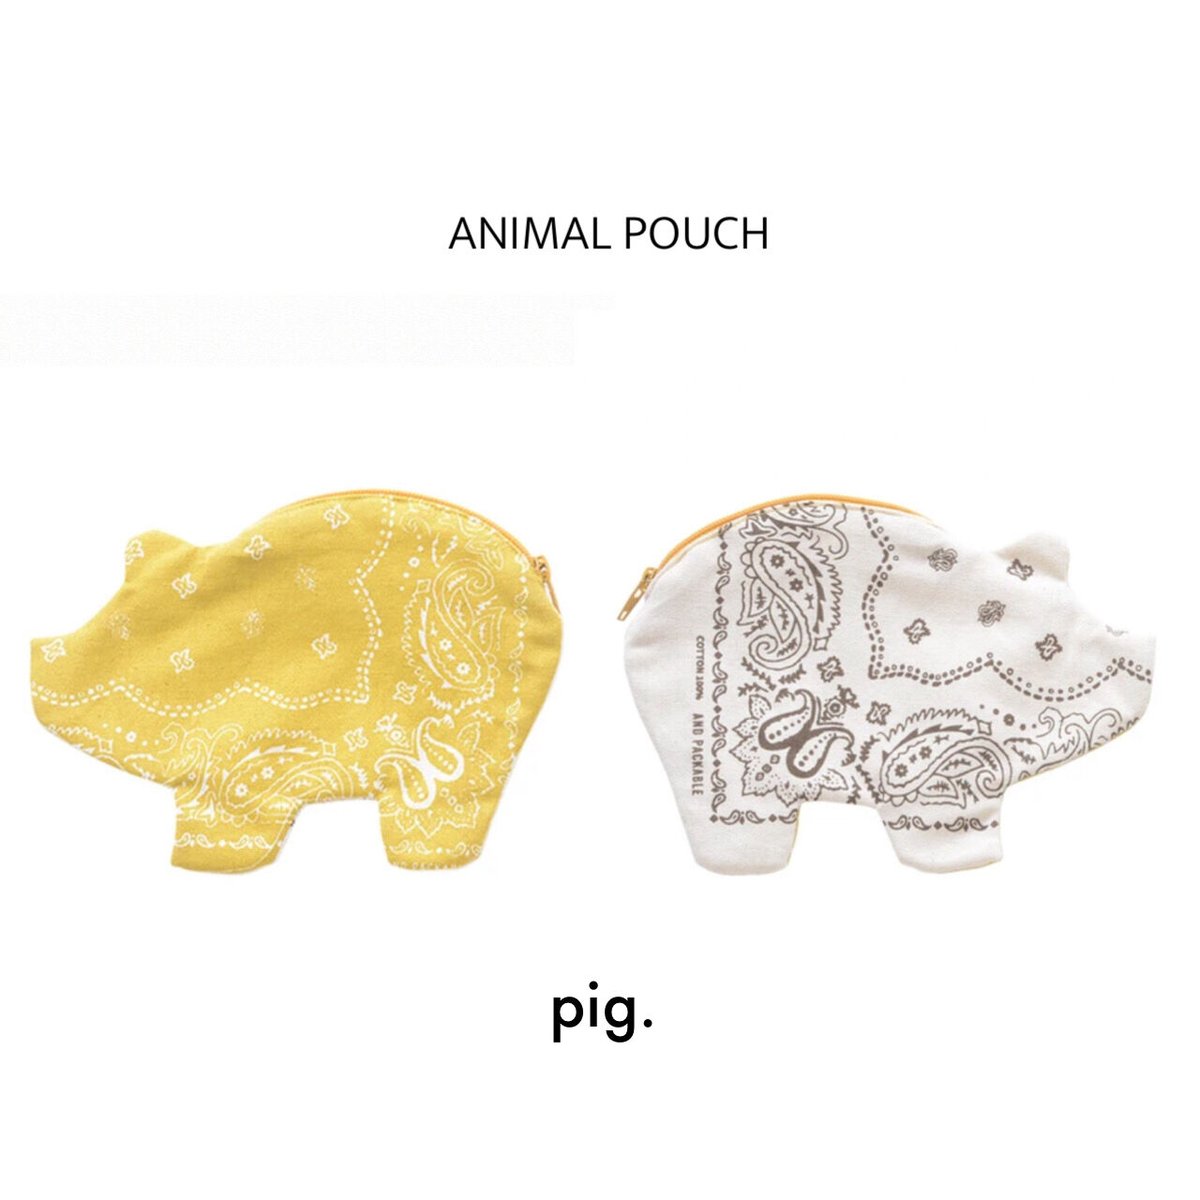 ANIMAL POUCH ［ ペイズリー柄 / ポーチ ］メイク道具収納 鍵 小物収納 ...